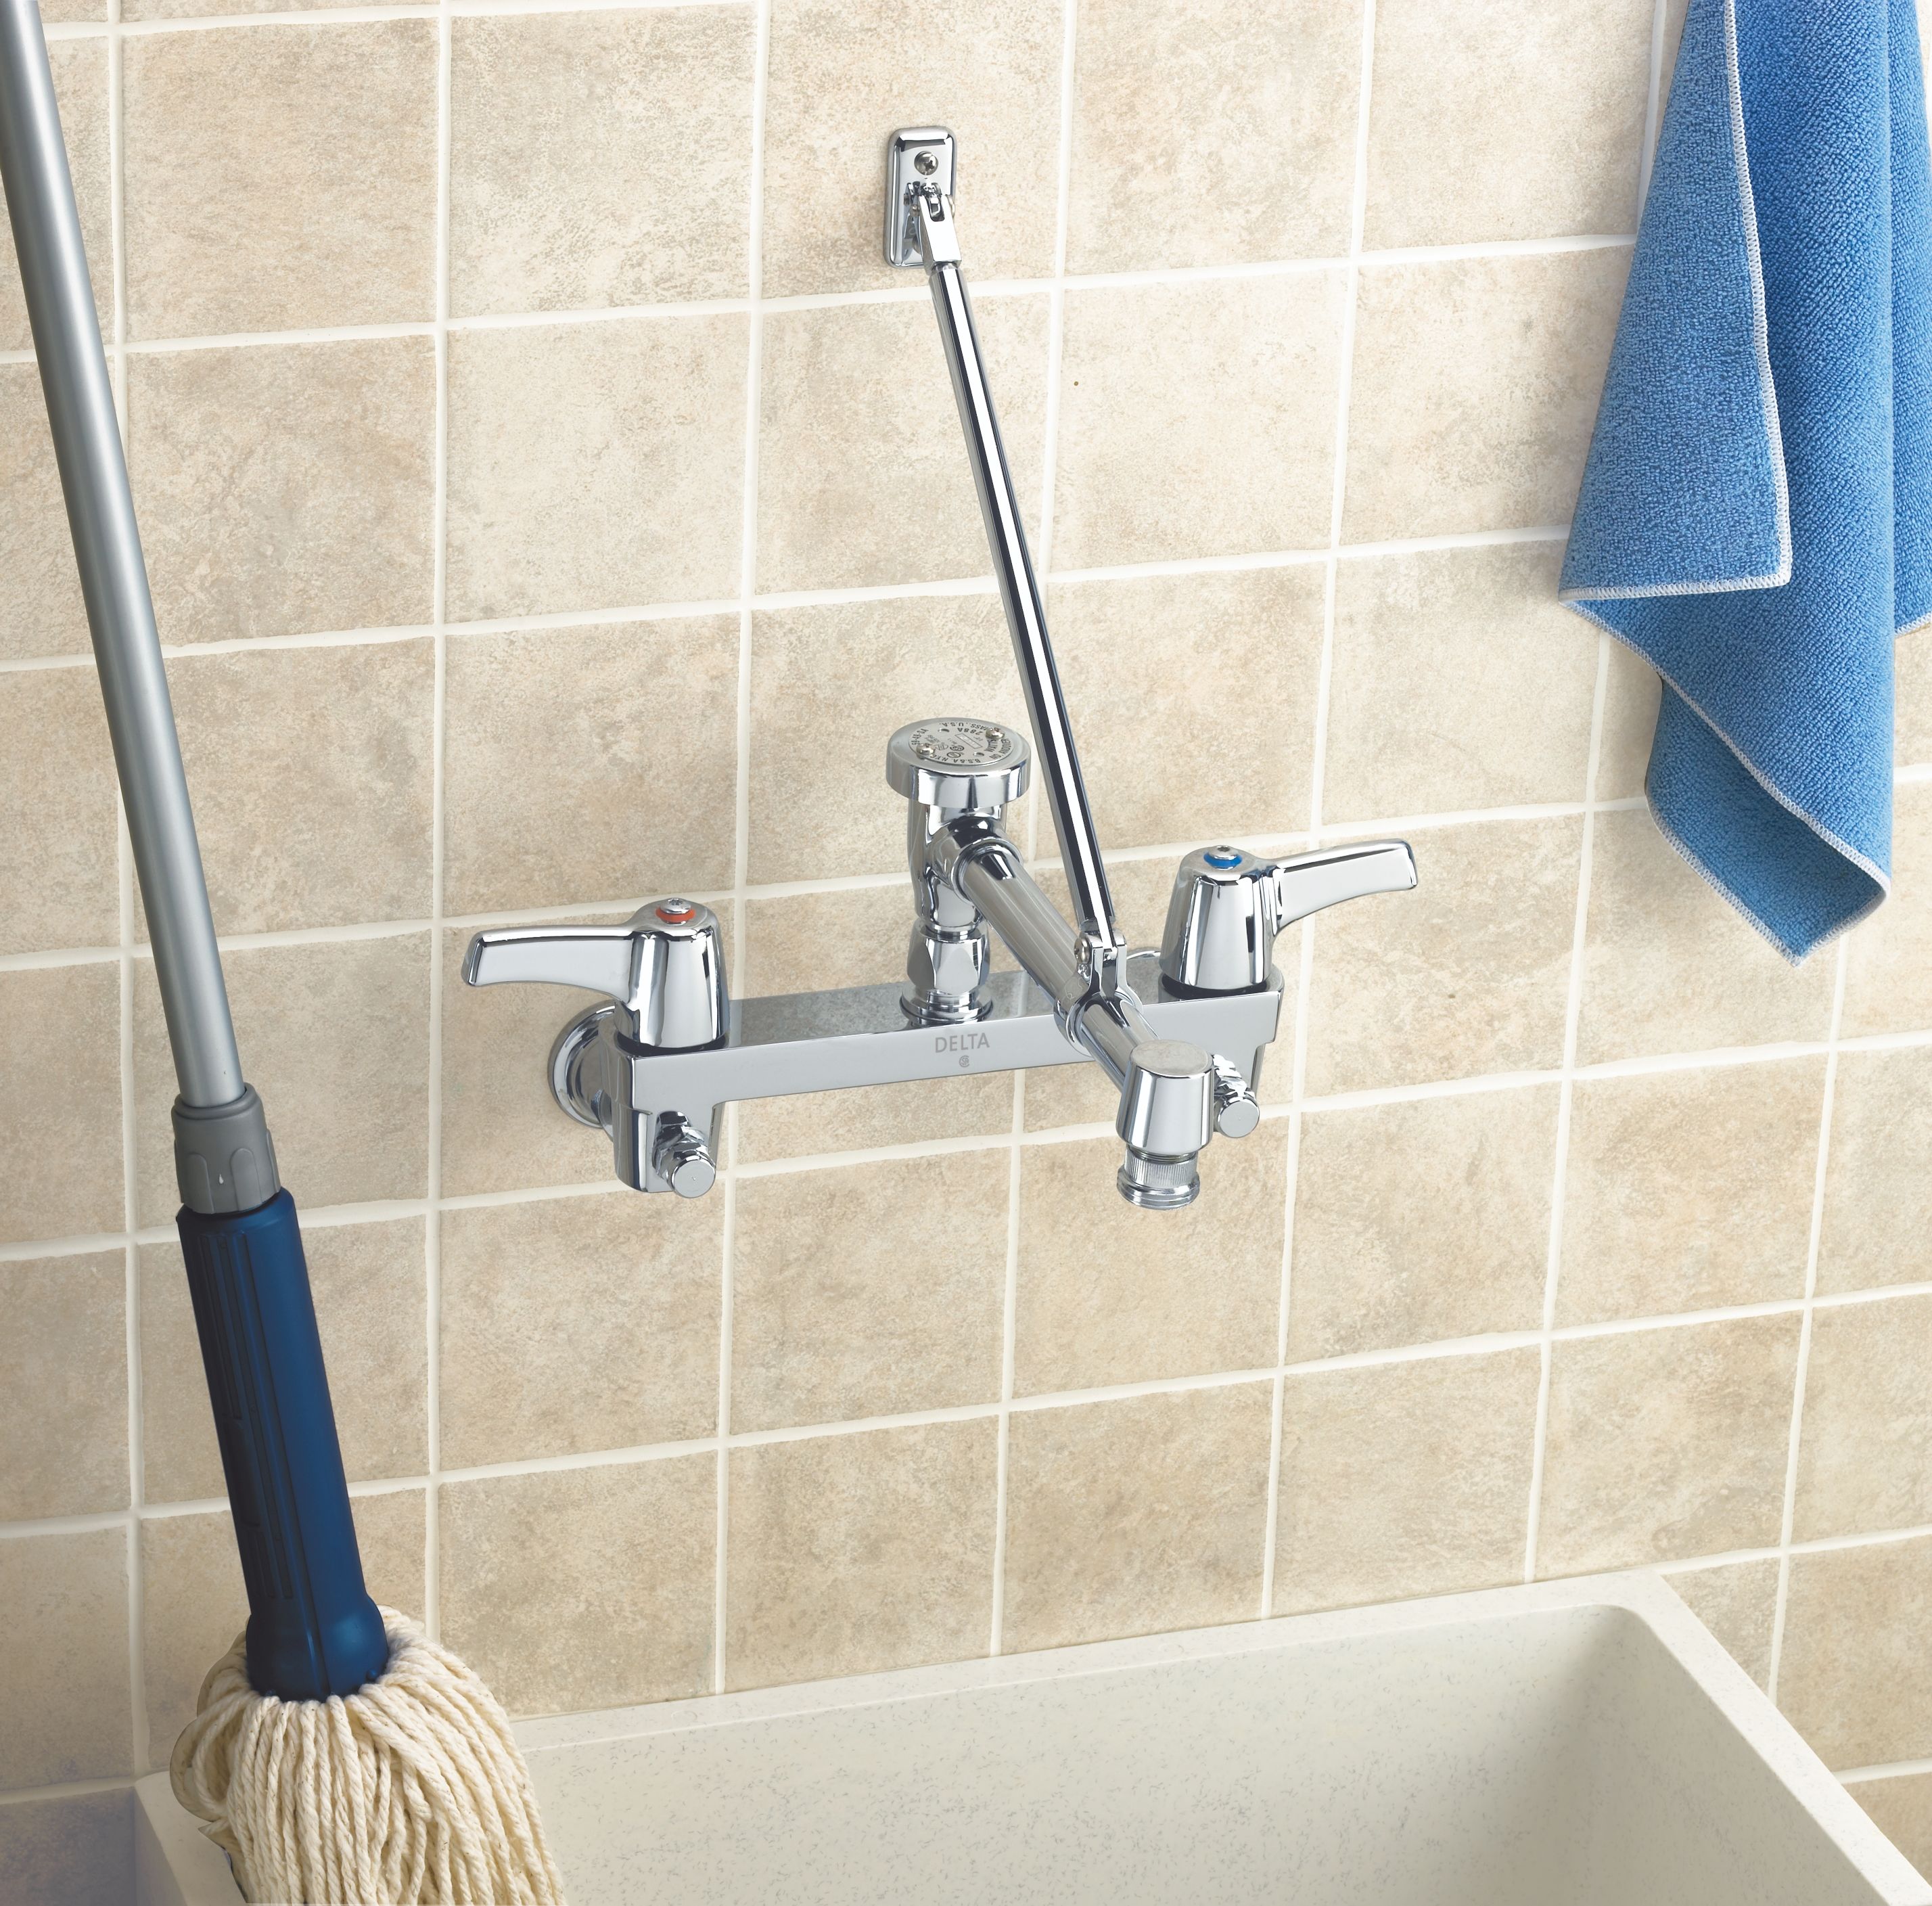 Delta 28C2383 Chrome Double Handle Ceramic Disc Wallmount Faucet with Lever  Blade Handles Long Spout with Brace and Body Mounted Angle Vacuum Breaker  from the Commercial Series